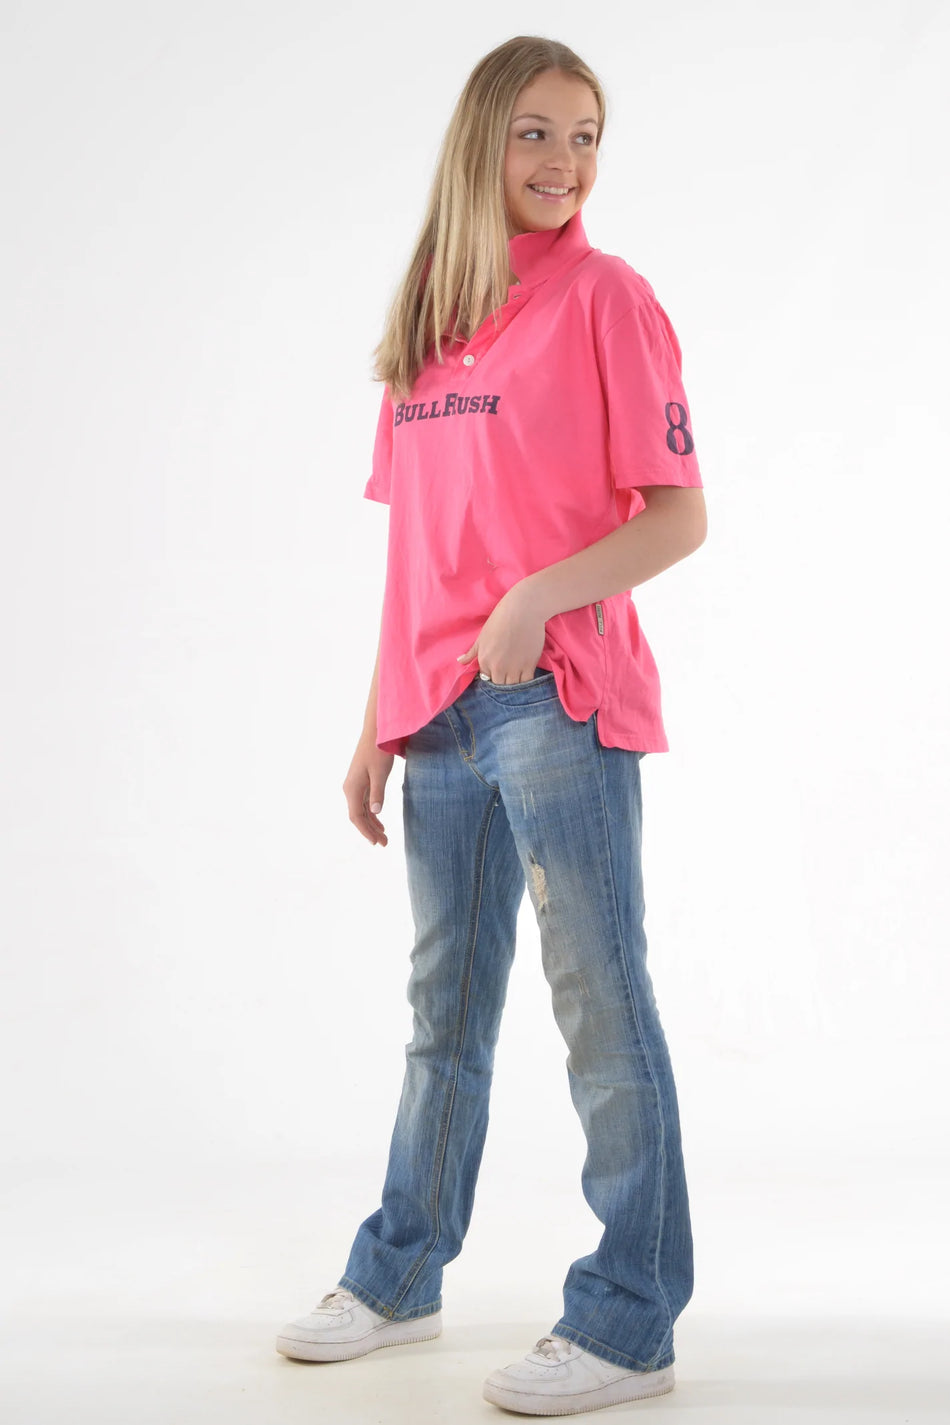 Bullrush - Womens Polo Top in Pink